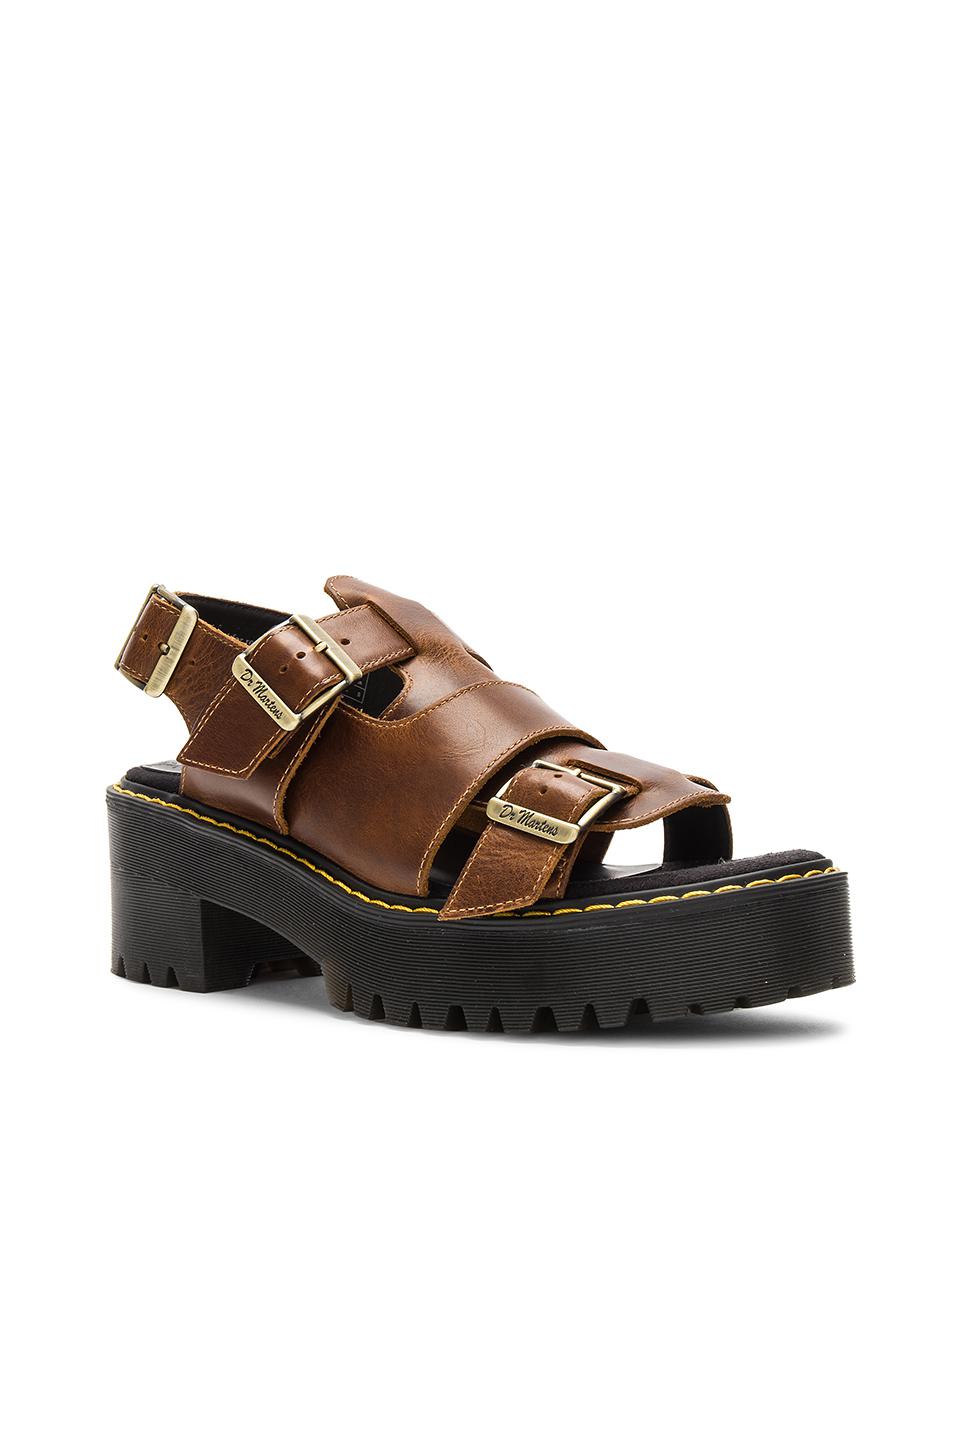 Dr. Martens Leather Ariel Sandal in Butterscotch (Brown) - Lyst